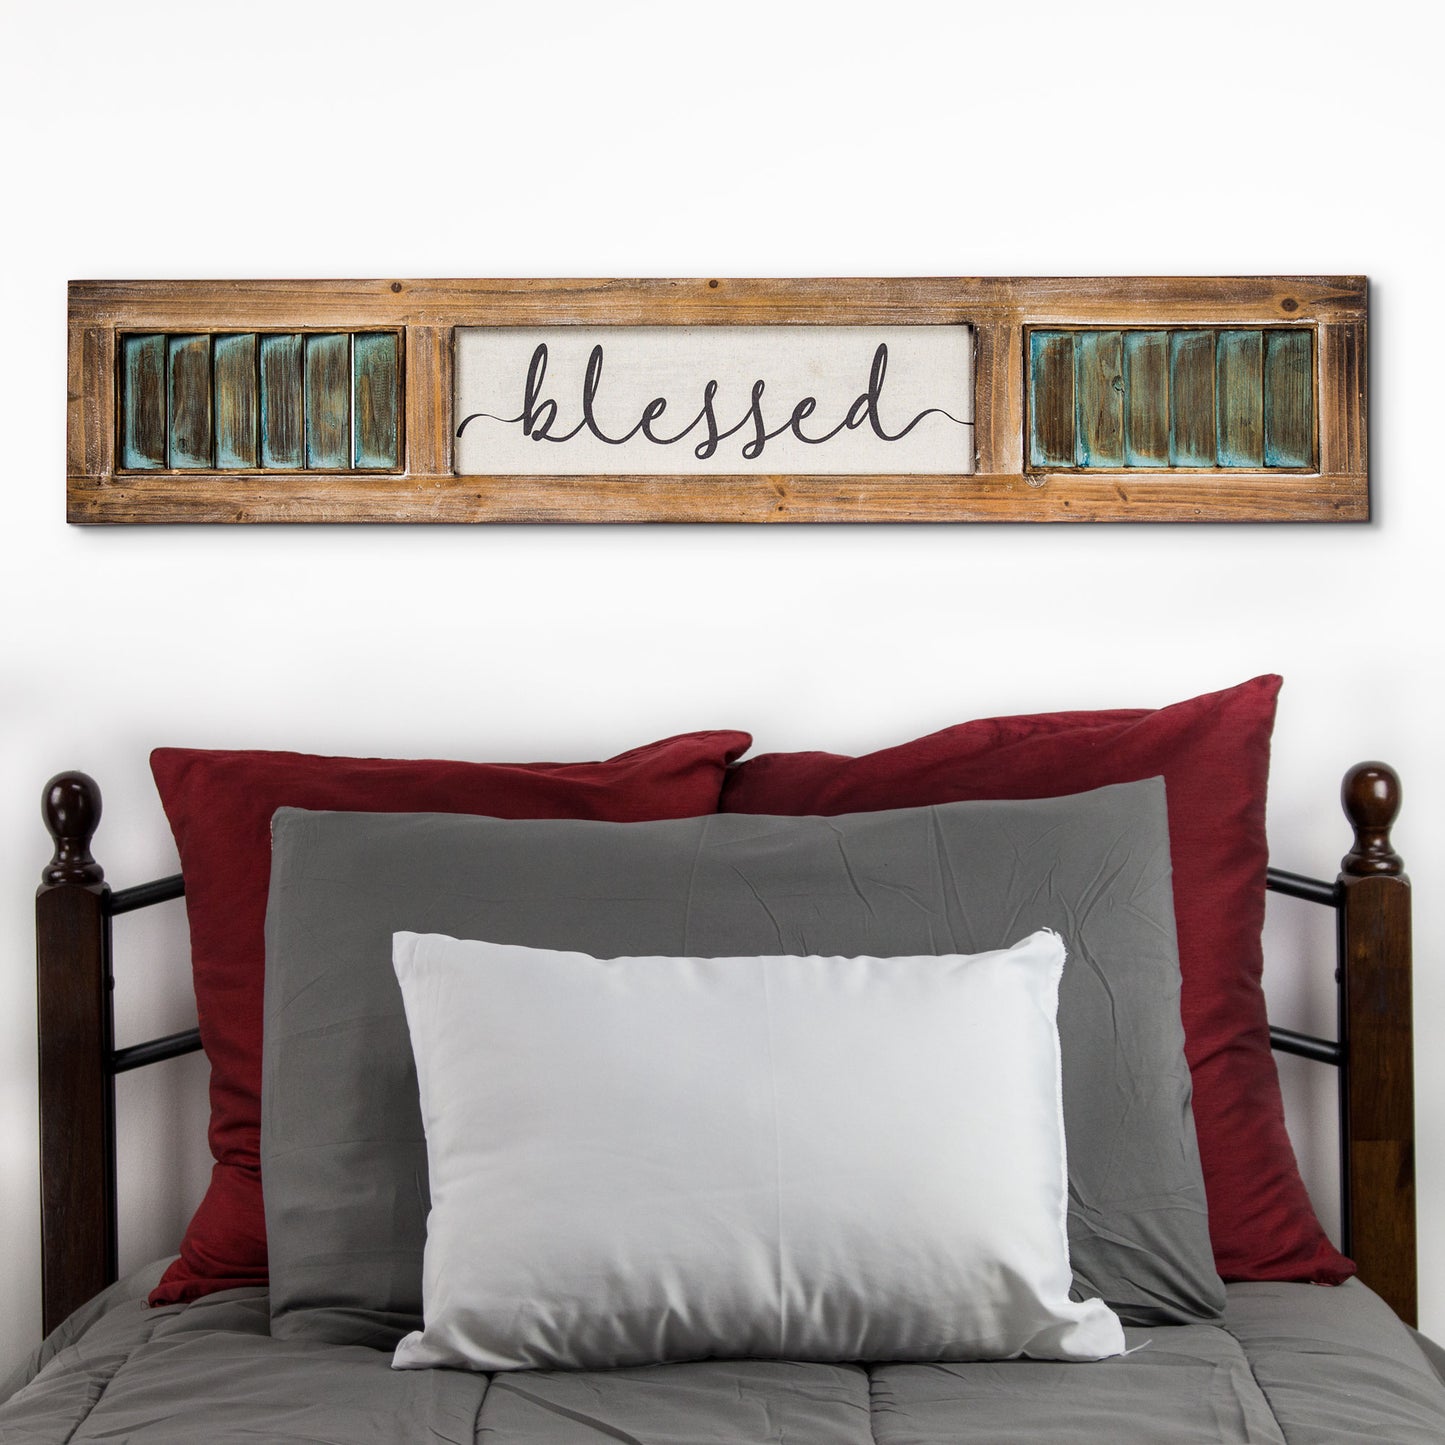 Blessed Inspirational Wood Canvas Sign